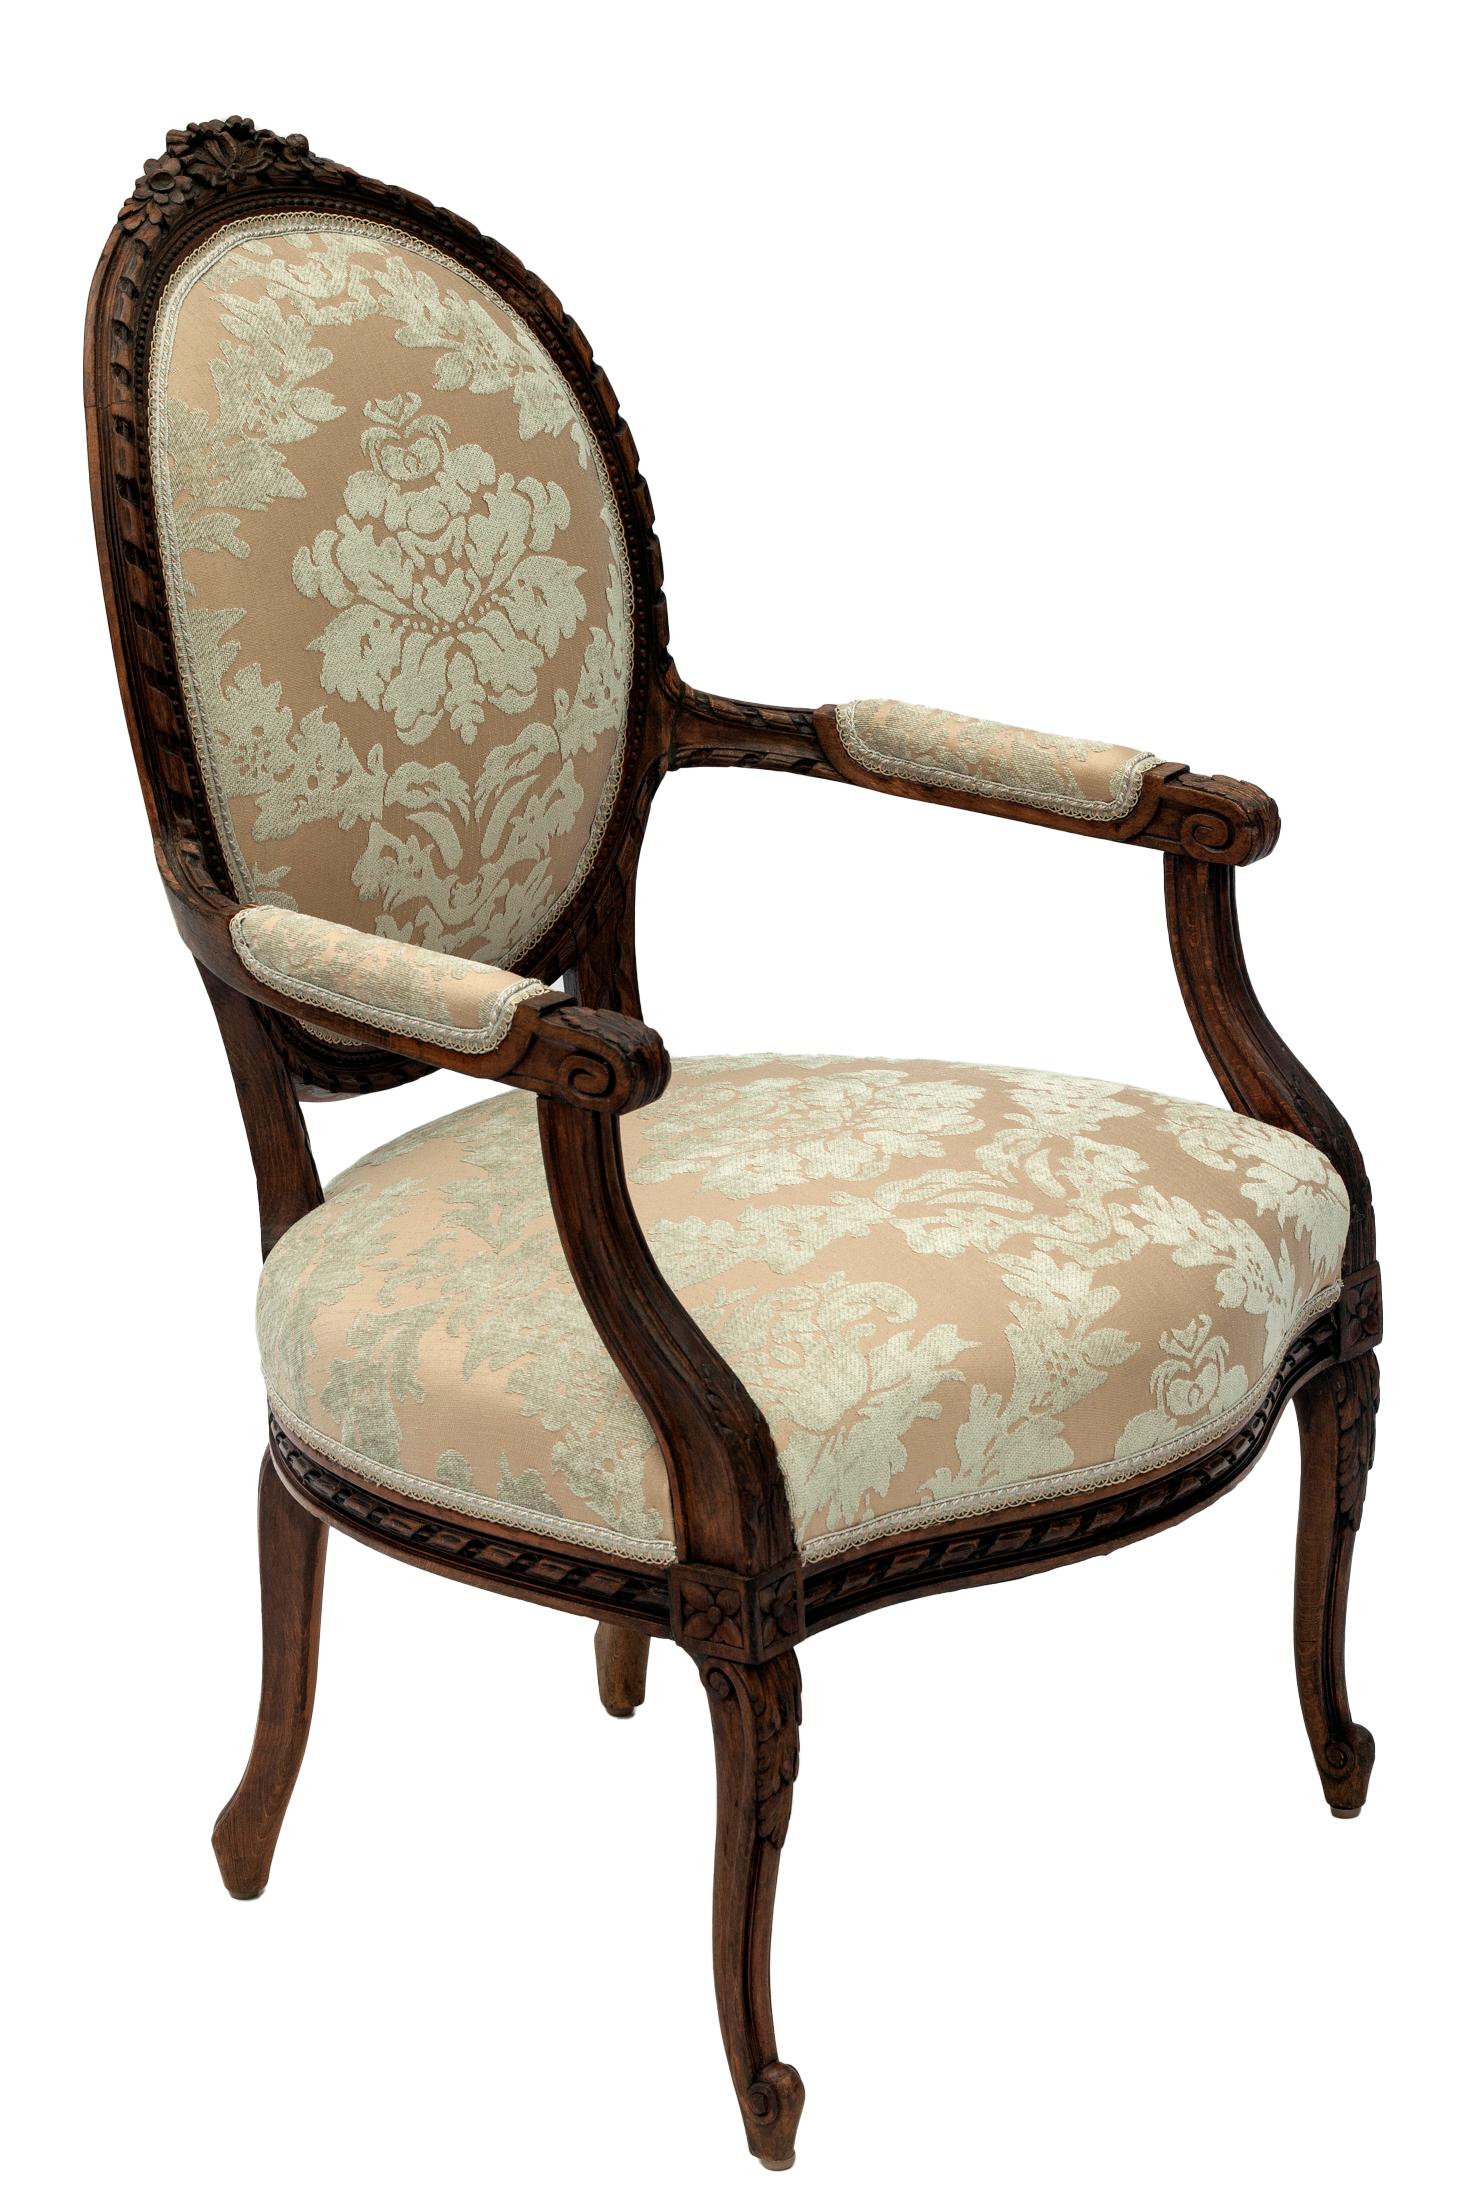 A French Louis XVI period finely carved walnut armchair with oval back and burnout damask upholstery & trimmed with Samuel & Sons silk gimp.
The chair is raised on four tapered carved legs.
This armchair will bring French elegance to any room,